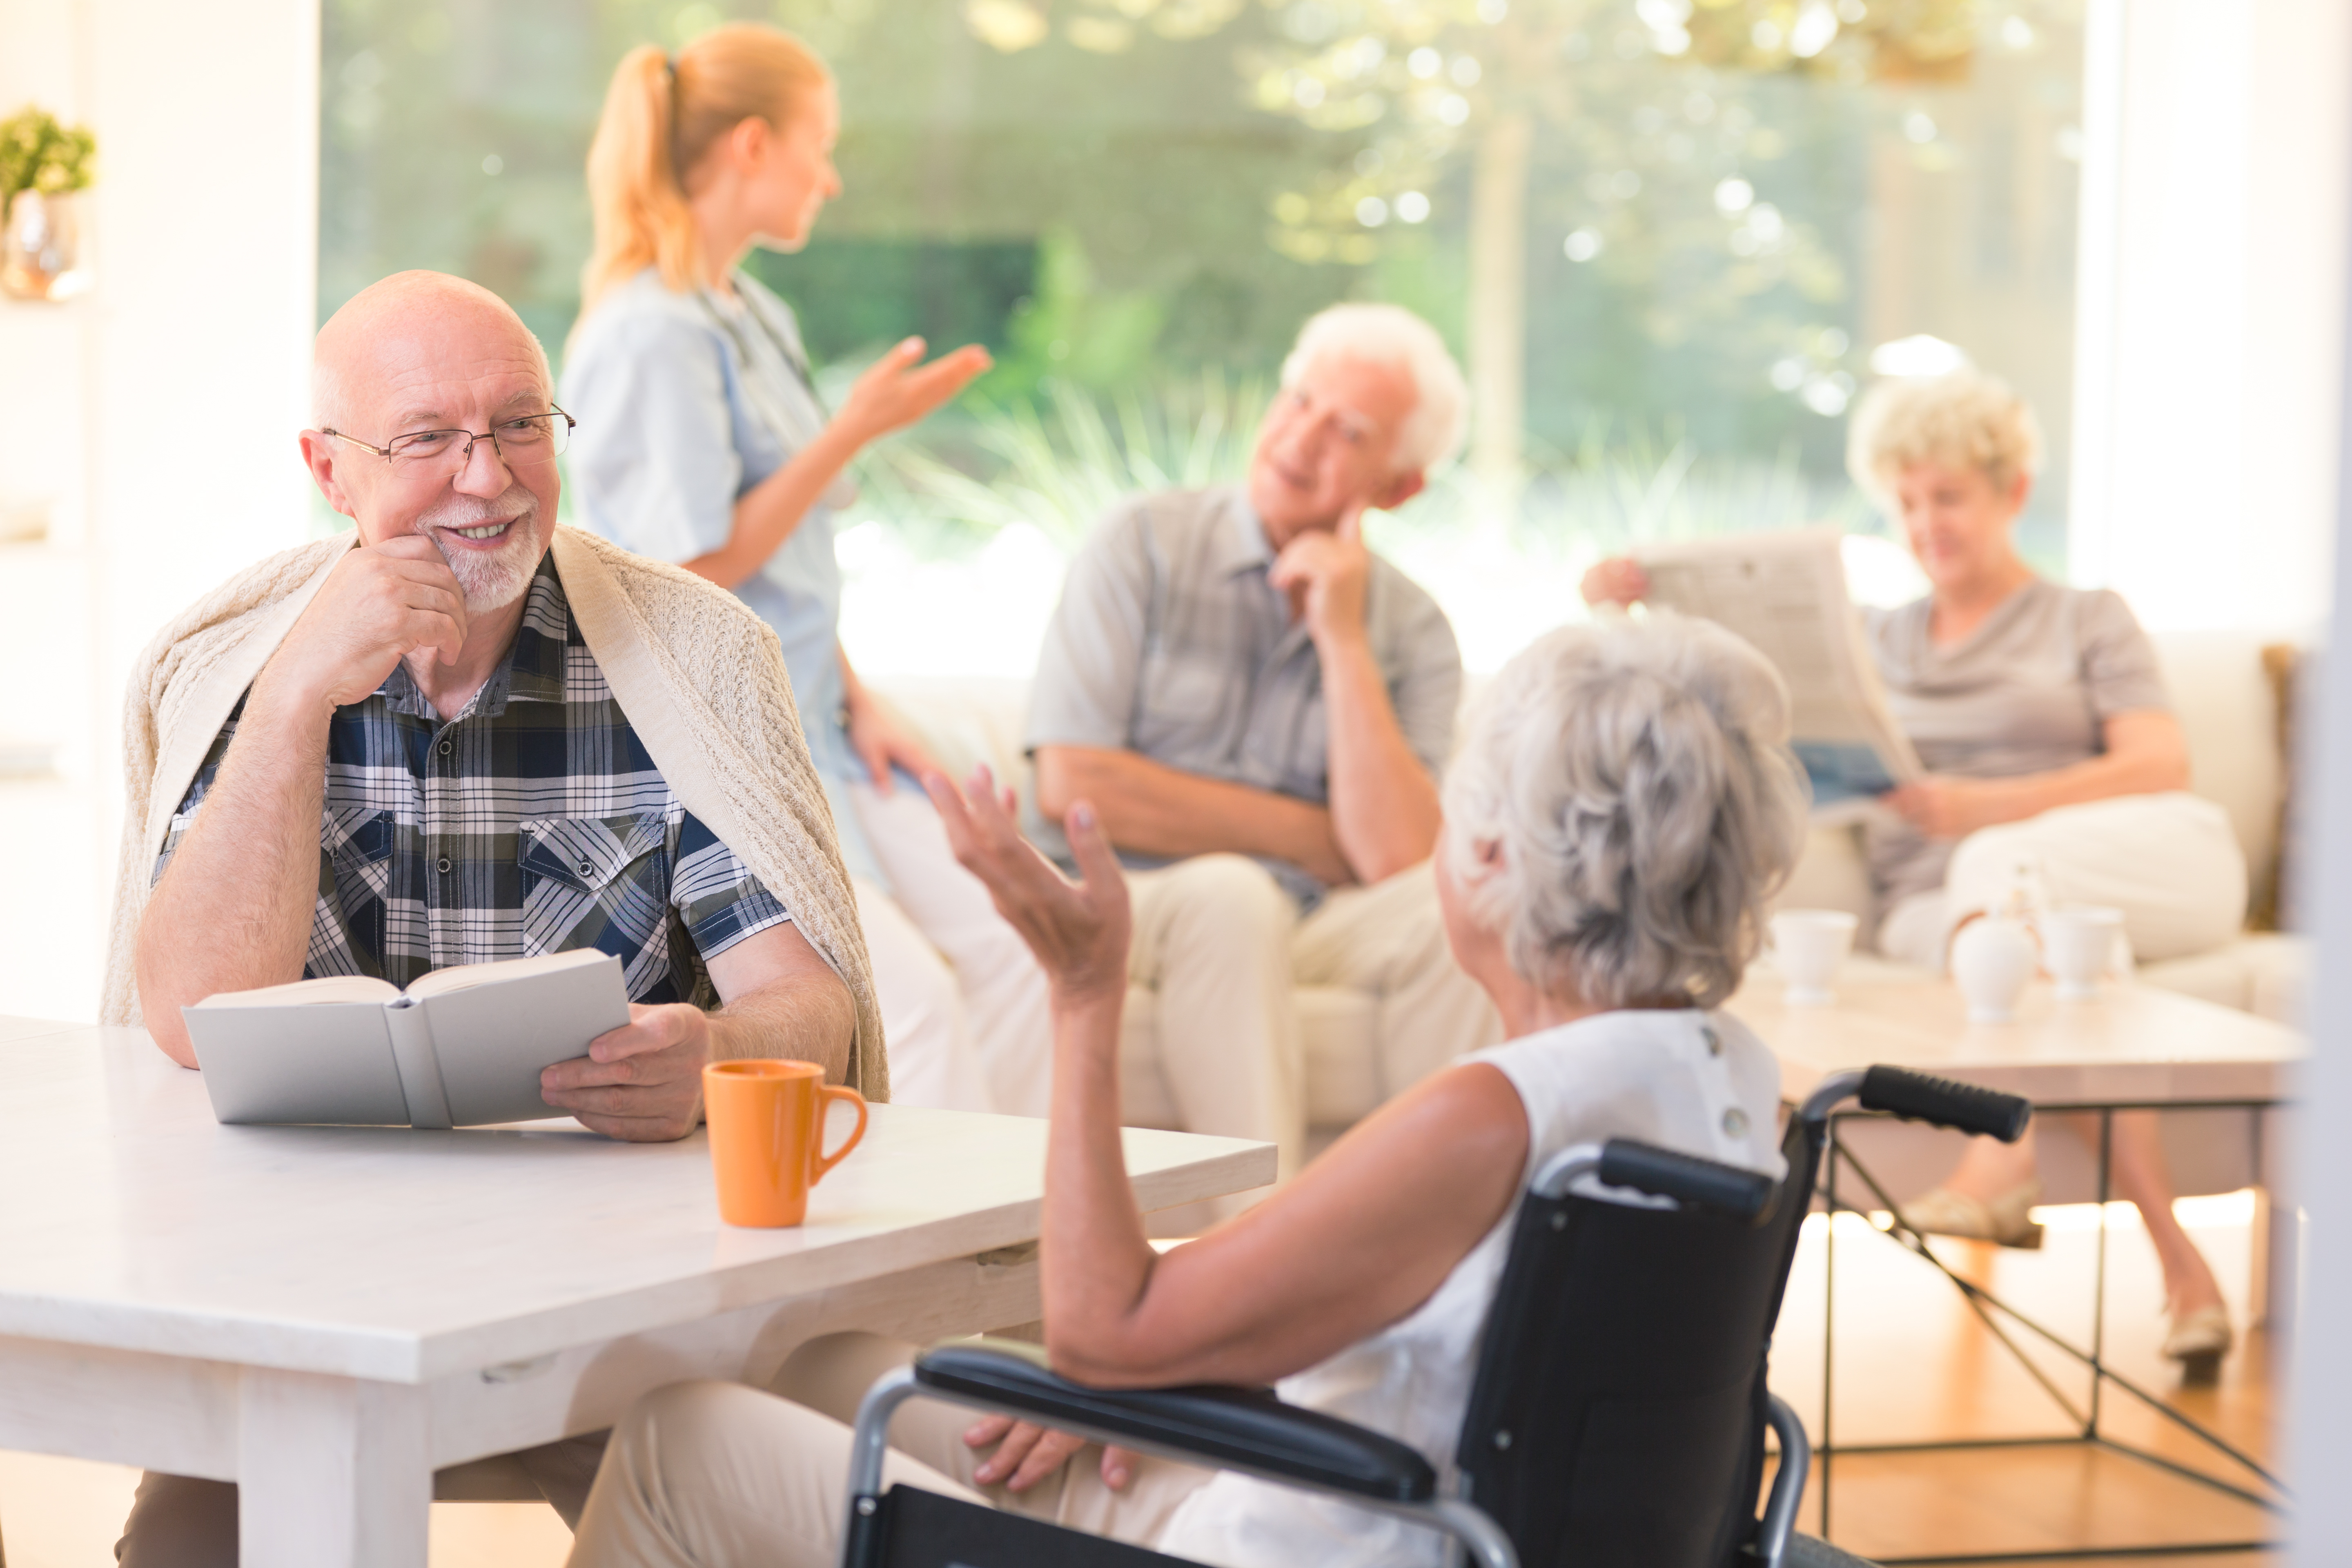 2018.12.04 Stock Photo Inside Retirement Home Happy elderly people being social and having a conversation 001